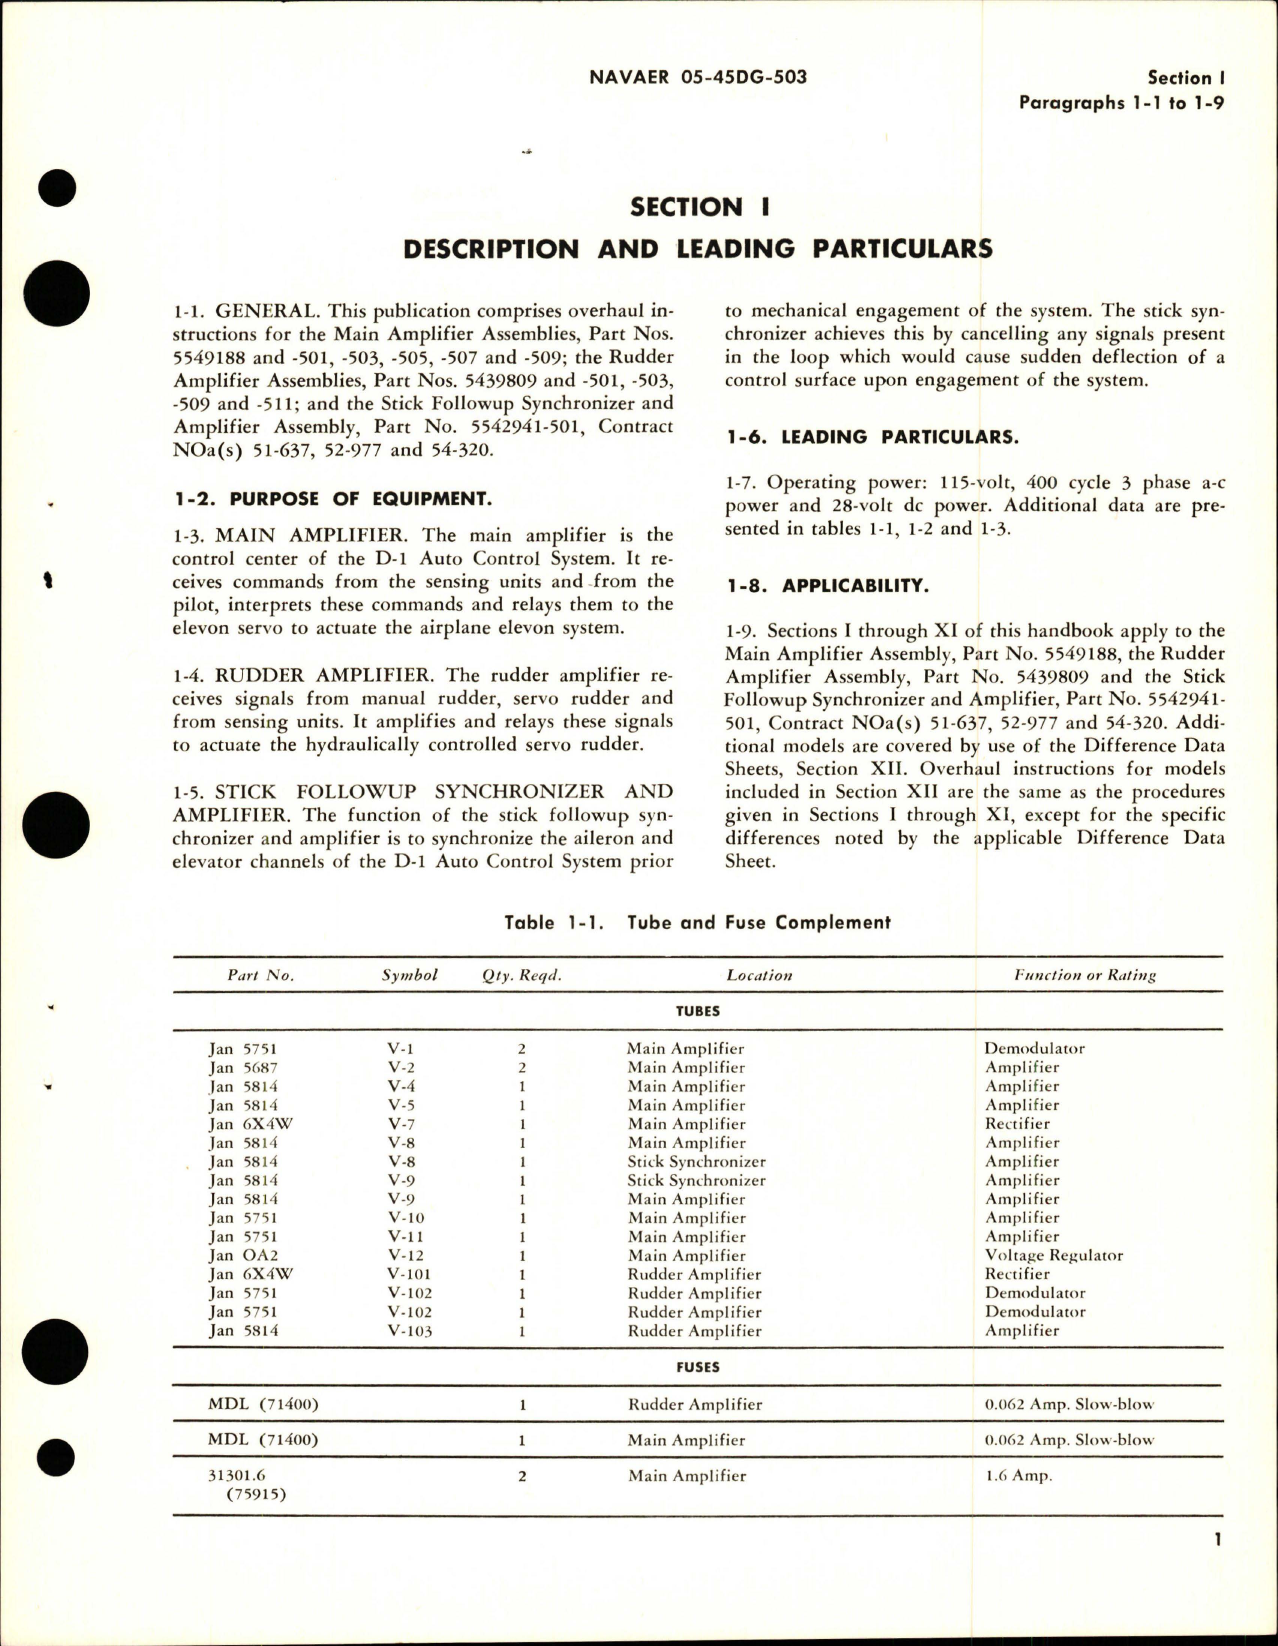 Sample page 9 from AirCorps Library document: Overhaul Instructions for D-1 Autocontrol Main Amplifier Assembly, Rudder Amplifier Assembly, and Stick Follow up Synchronizer